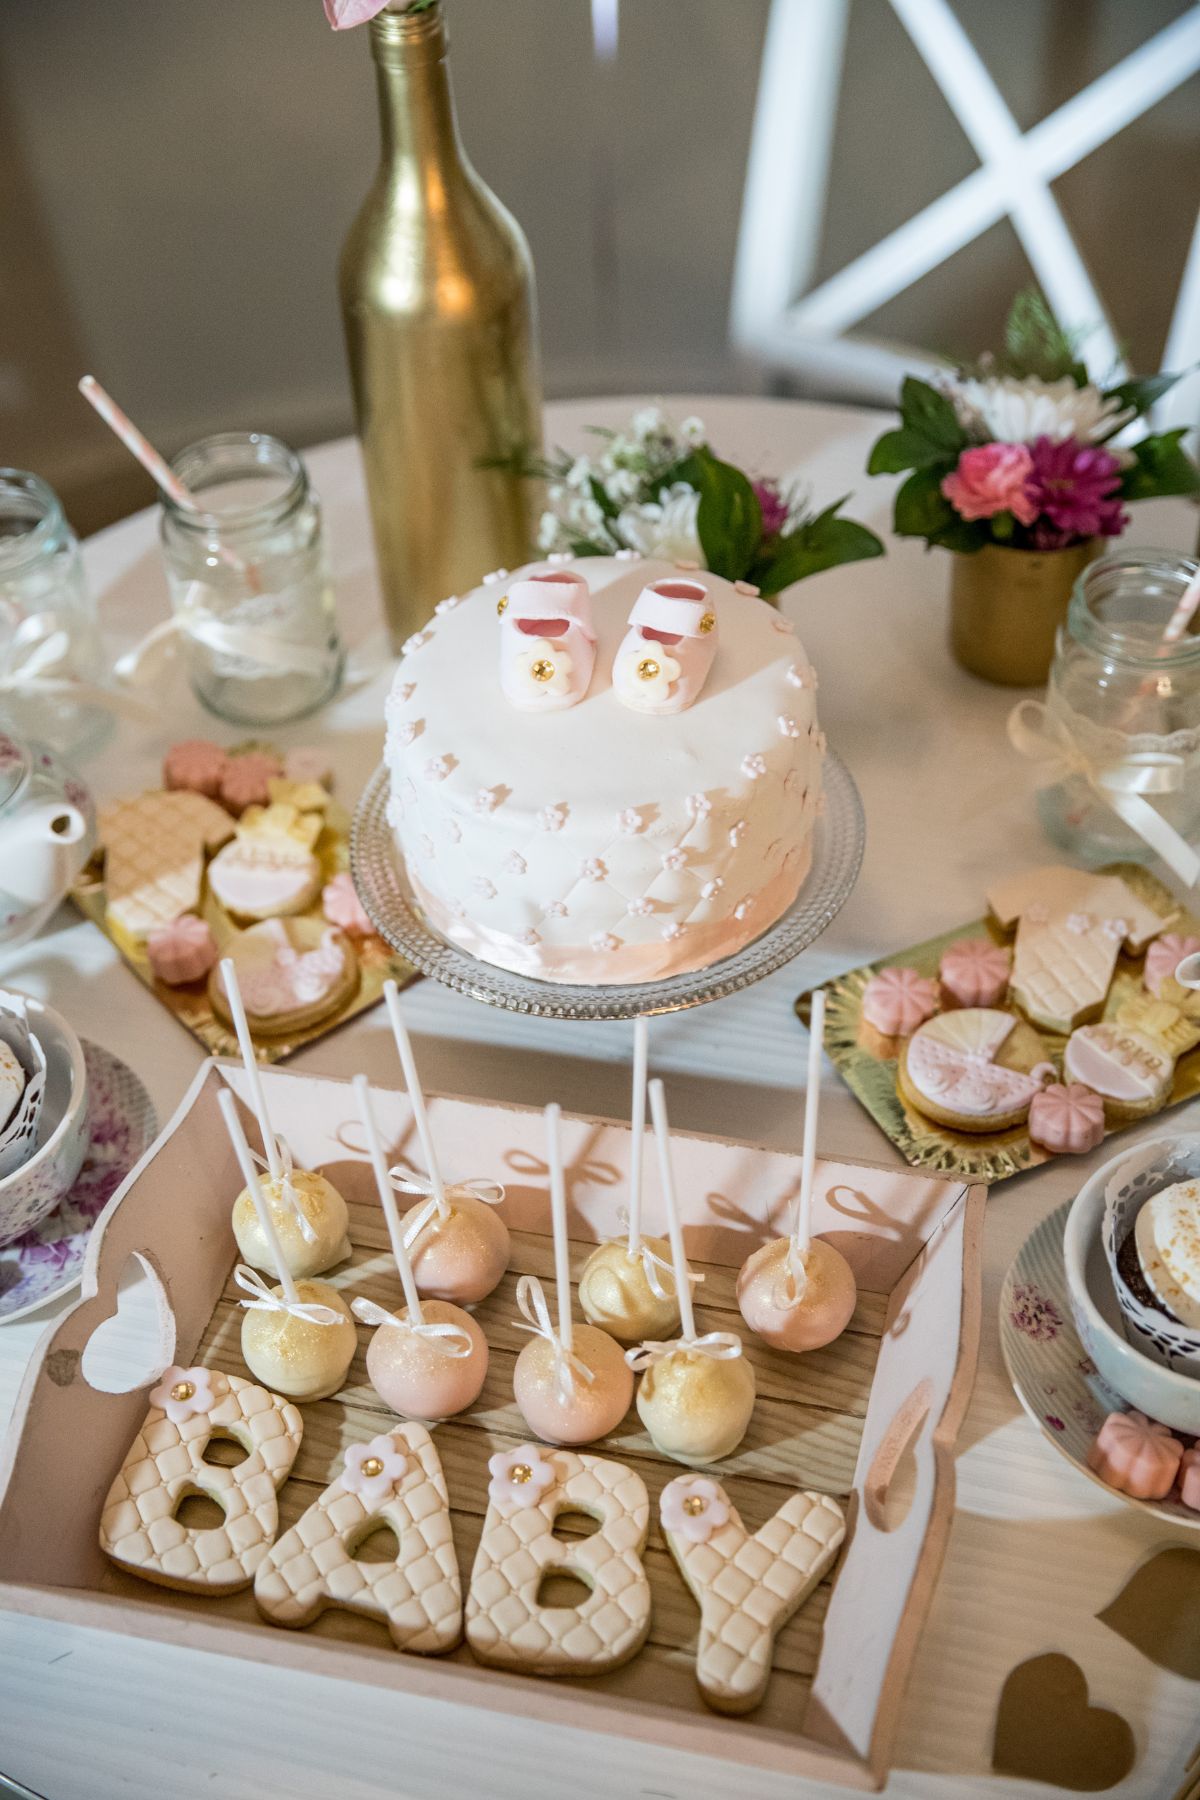 A dessert table at a baby shower with cake, cookies, and cake pops.